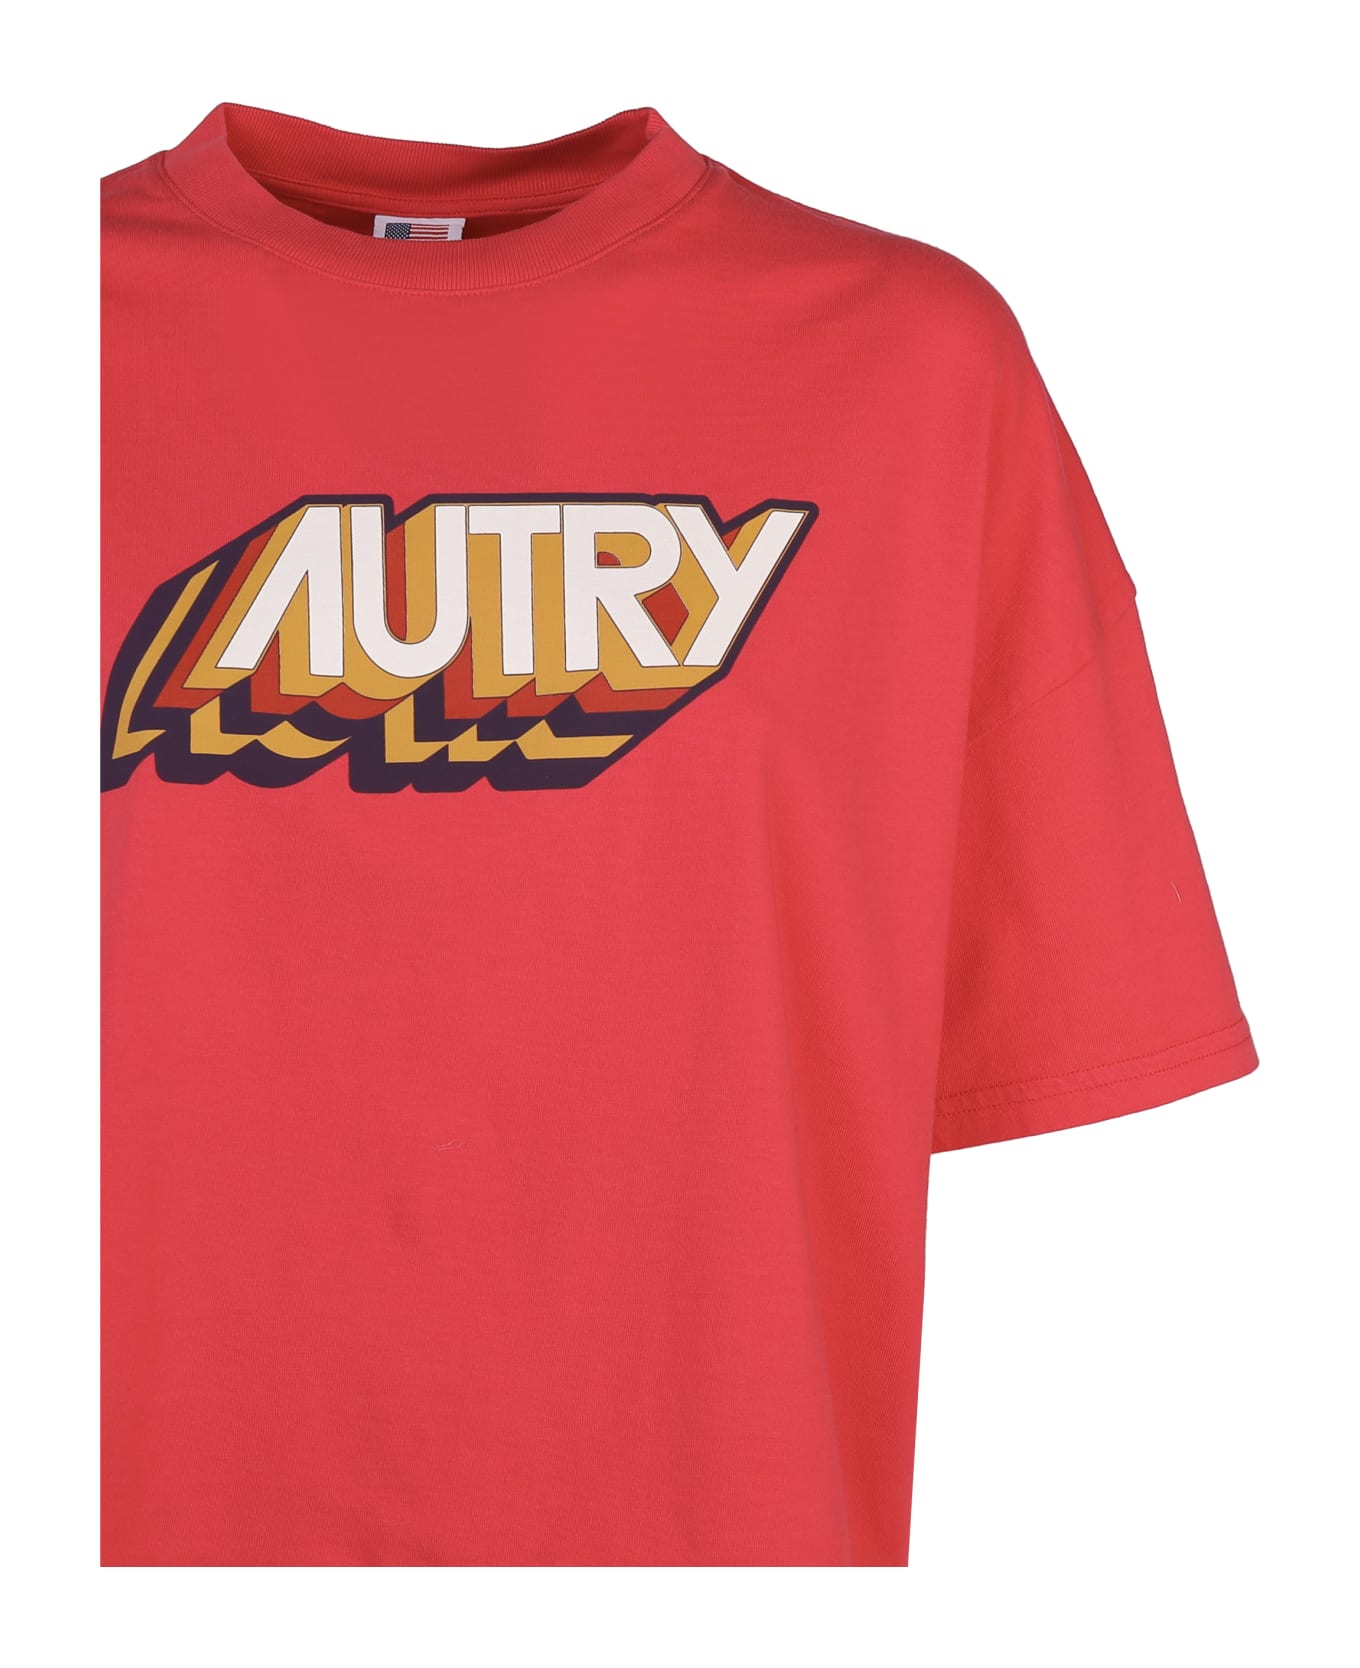 Autry Aerobic T-shirt - Red Tシャツ